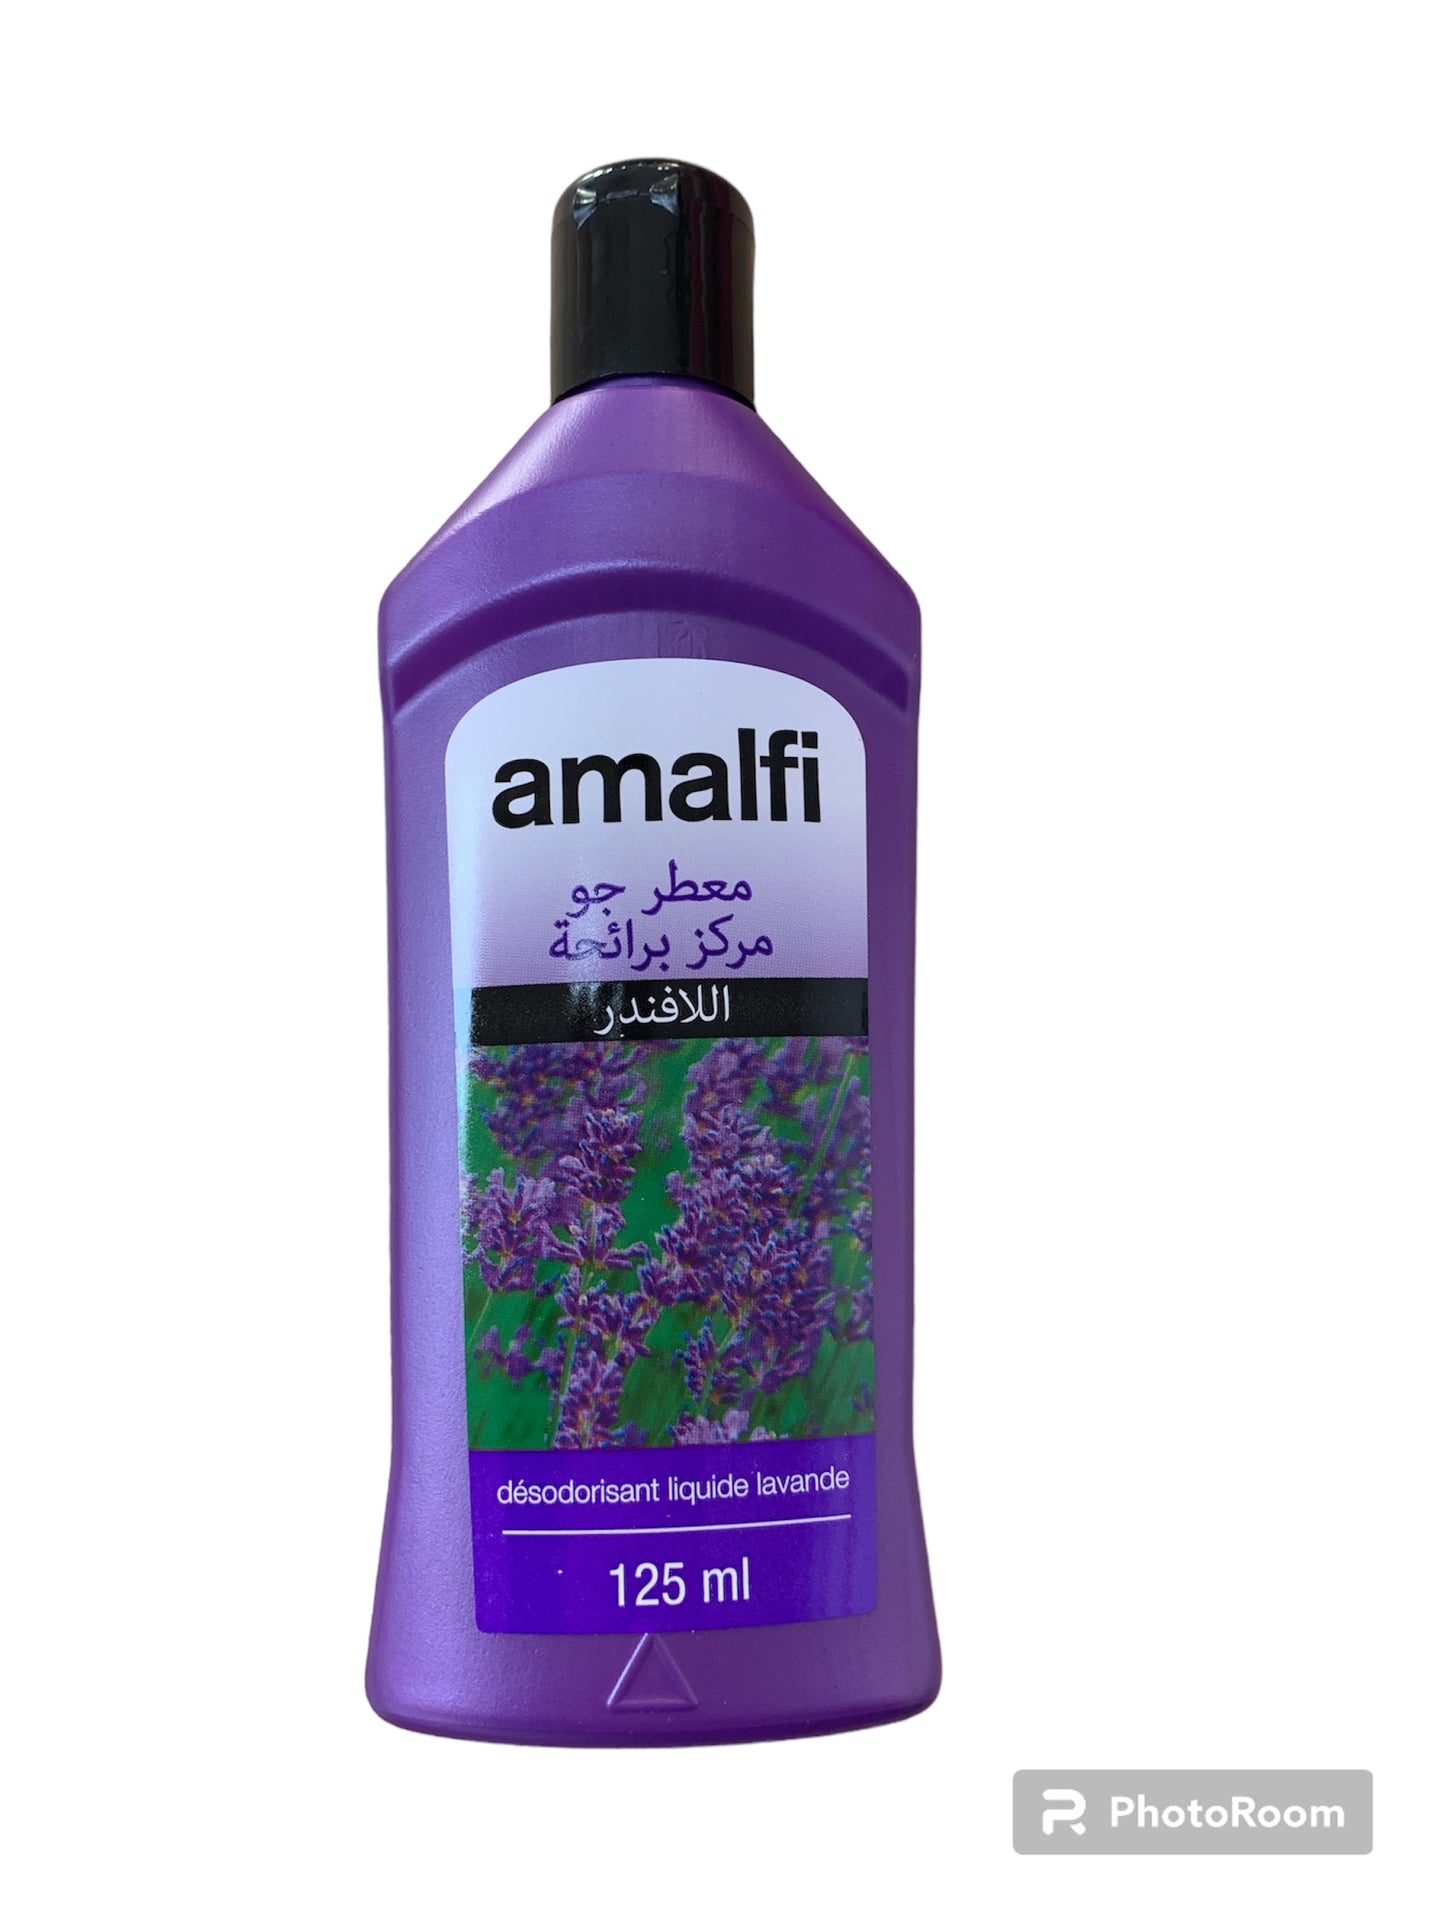 Amalfi Concentrated air freshener with lavender scent